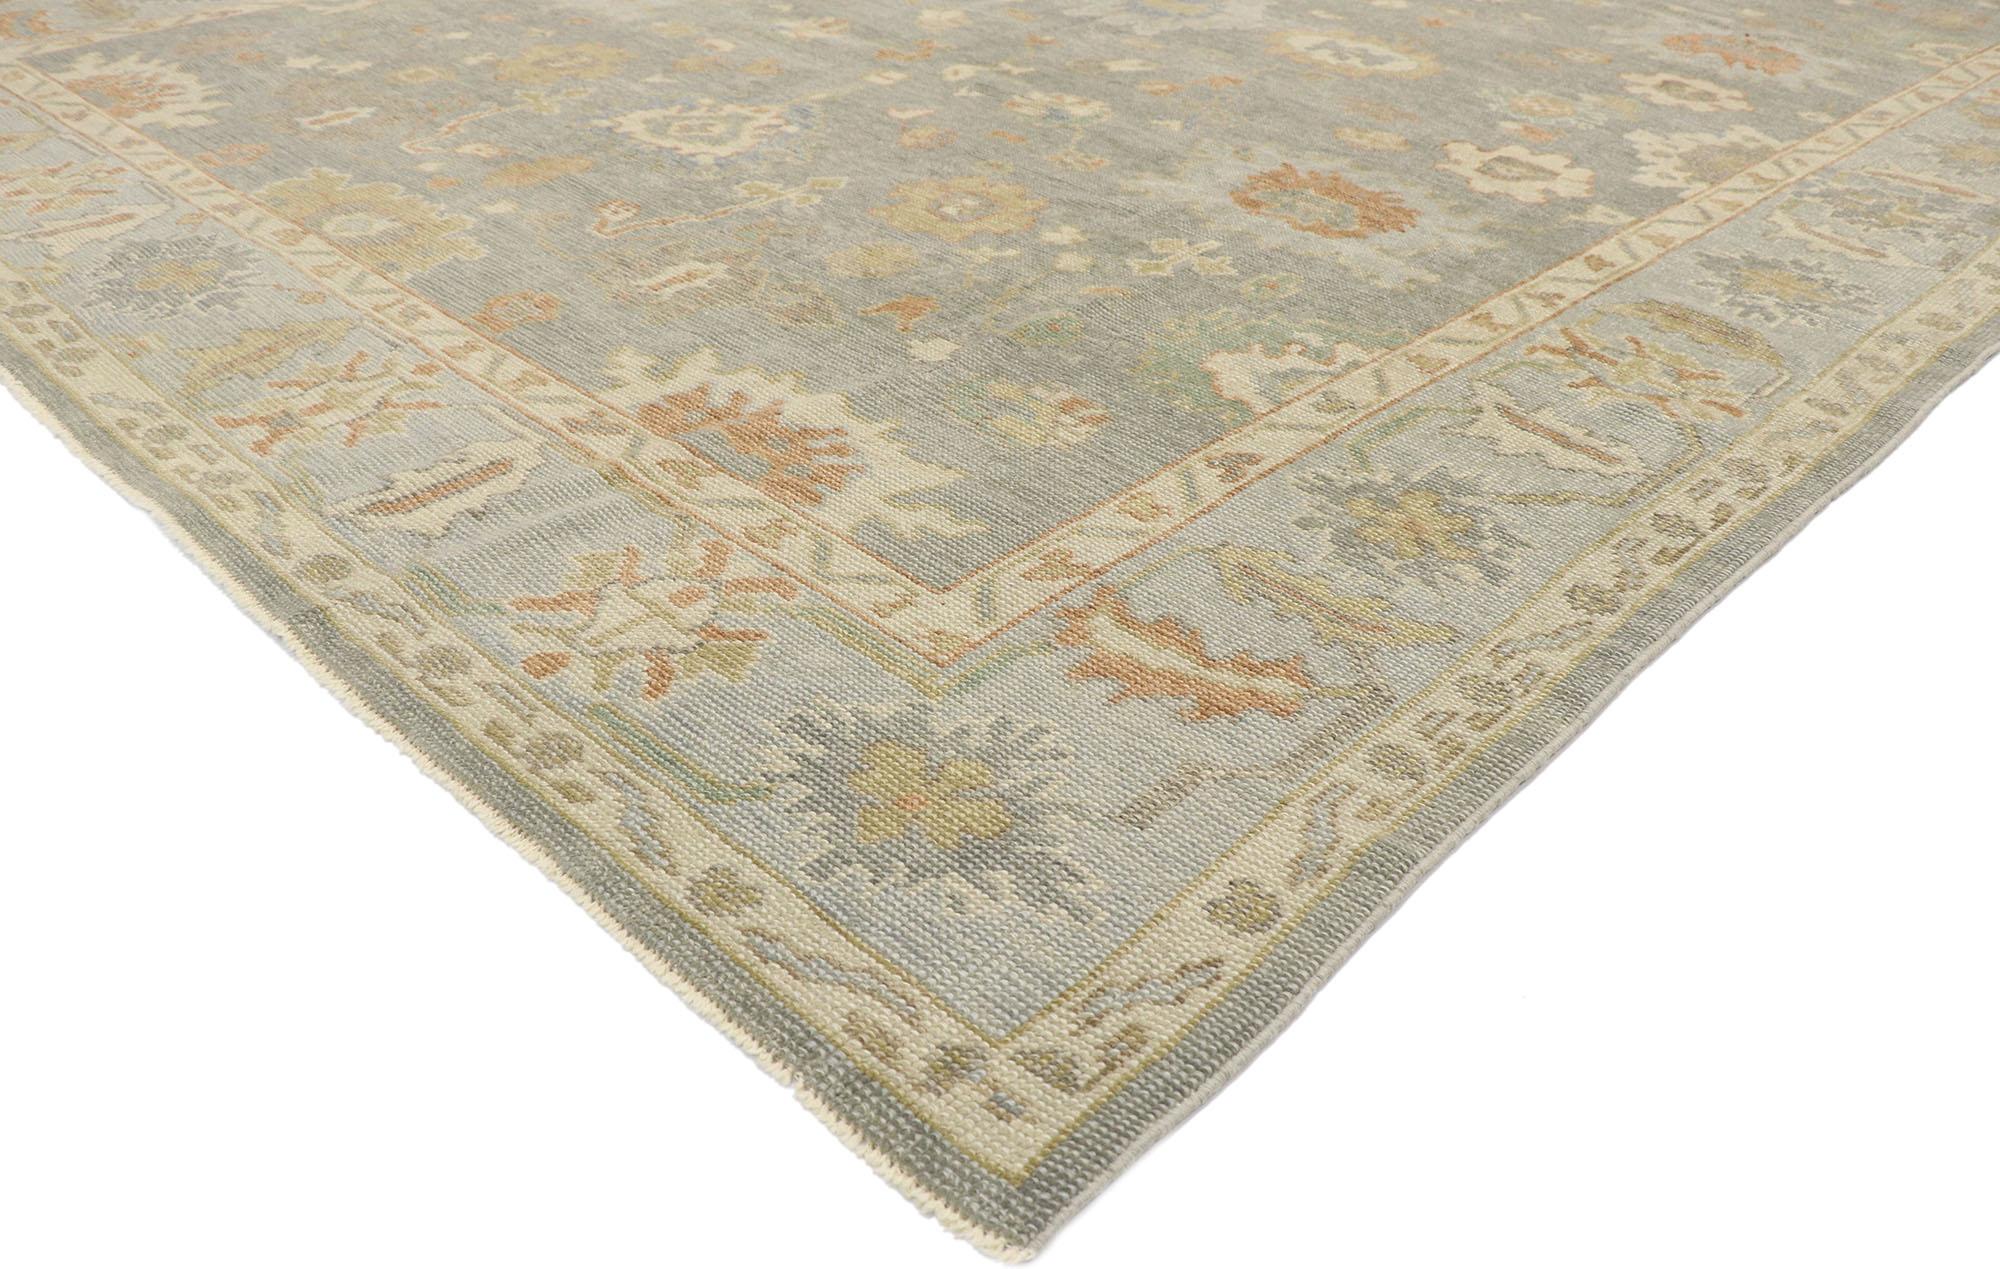 53515, new contemporary Turkish Oushak rug with Modern Transitional style. Displaying a timeless design and soft gray hues, serve up sophistication and modern elegance with this hand-knotted wool contemporary Turkish Oushak rug. An array of